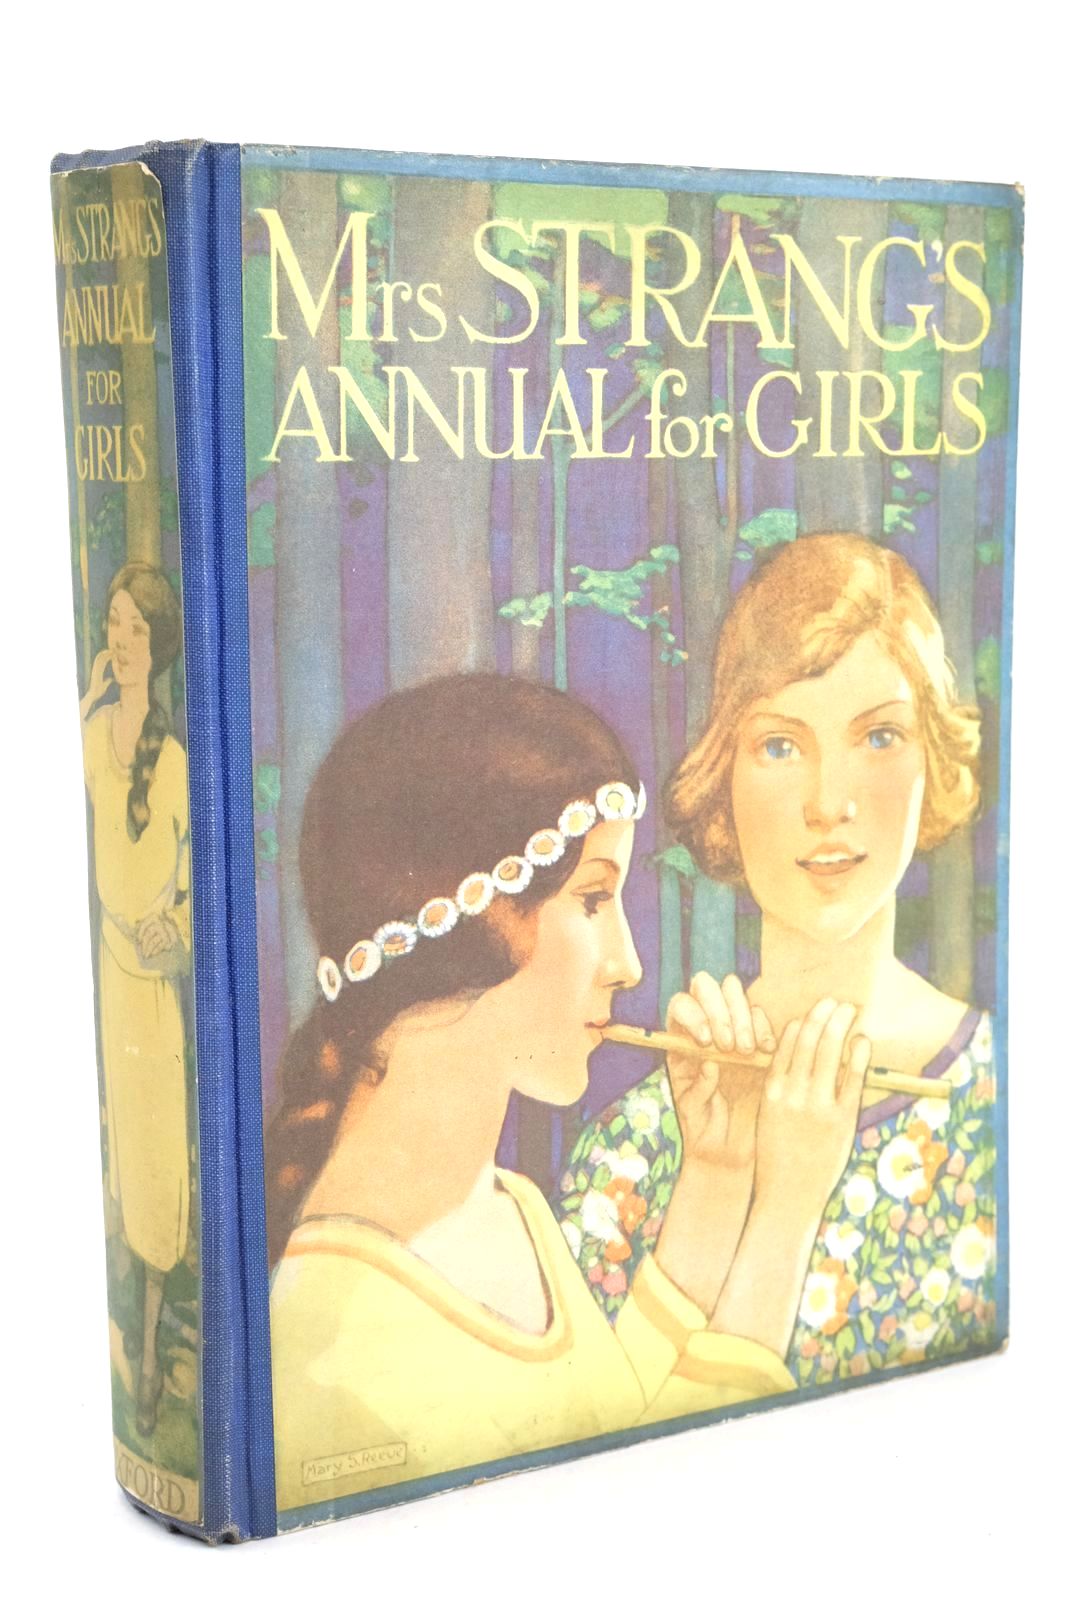 Photo of MRS. STRANG'S ANNUAL FOR GIRLS written by Strang, Mrs. Herbert Francklyn, Phillippa Stowell, Thora Bruce, Dorita Fairlie Darch, Winifred et al,  illustrated by Elcock, Howard K. Reeve, Mary Strange Johnston, M.D. Peart, M.A. et al.,  published by Oxford University Press, Humphrey Milford (STOCK CODE: 1325625)  for sale by Stella & Rose's Books